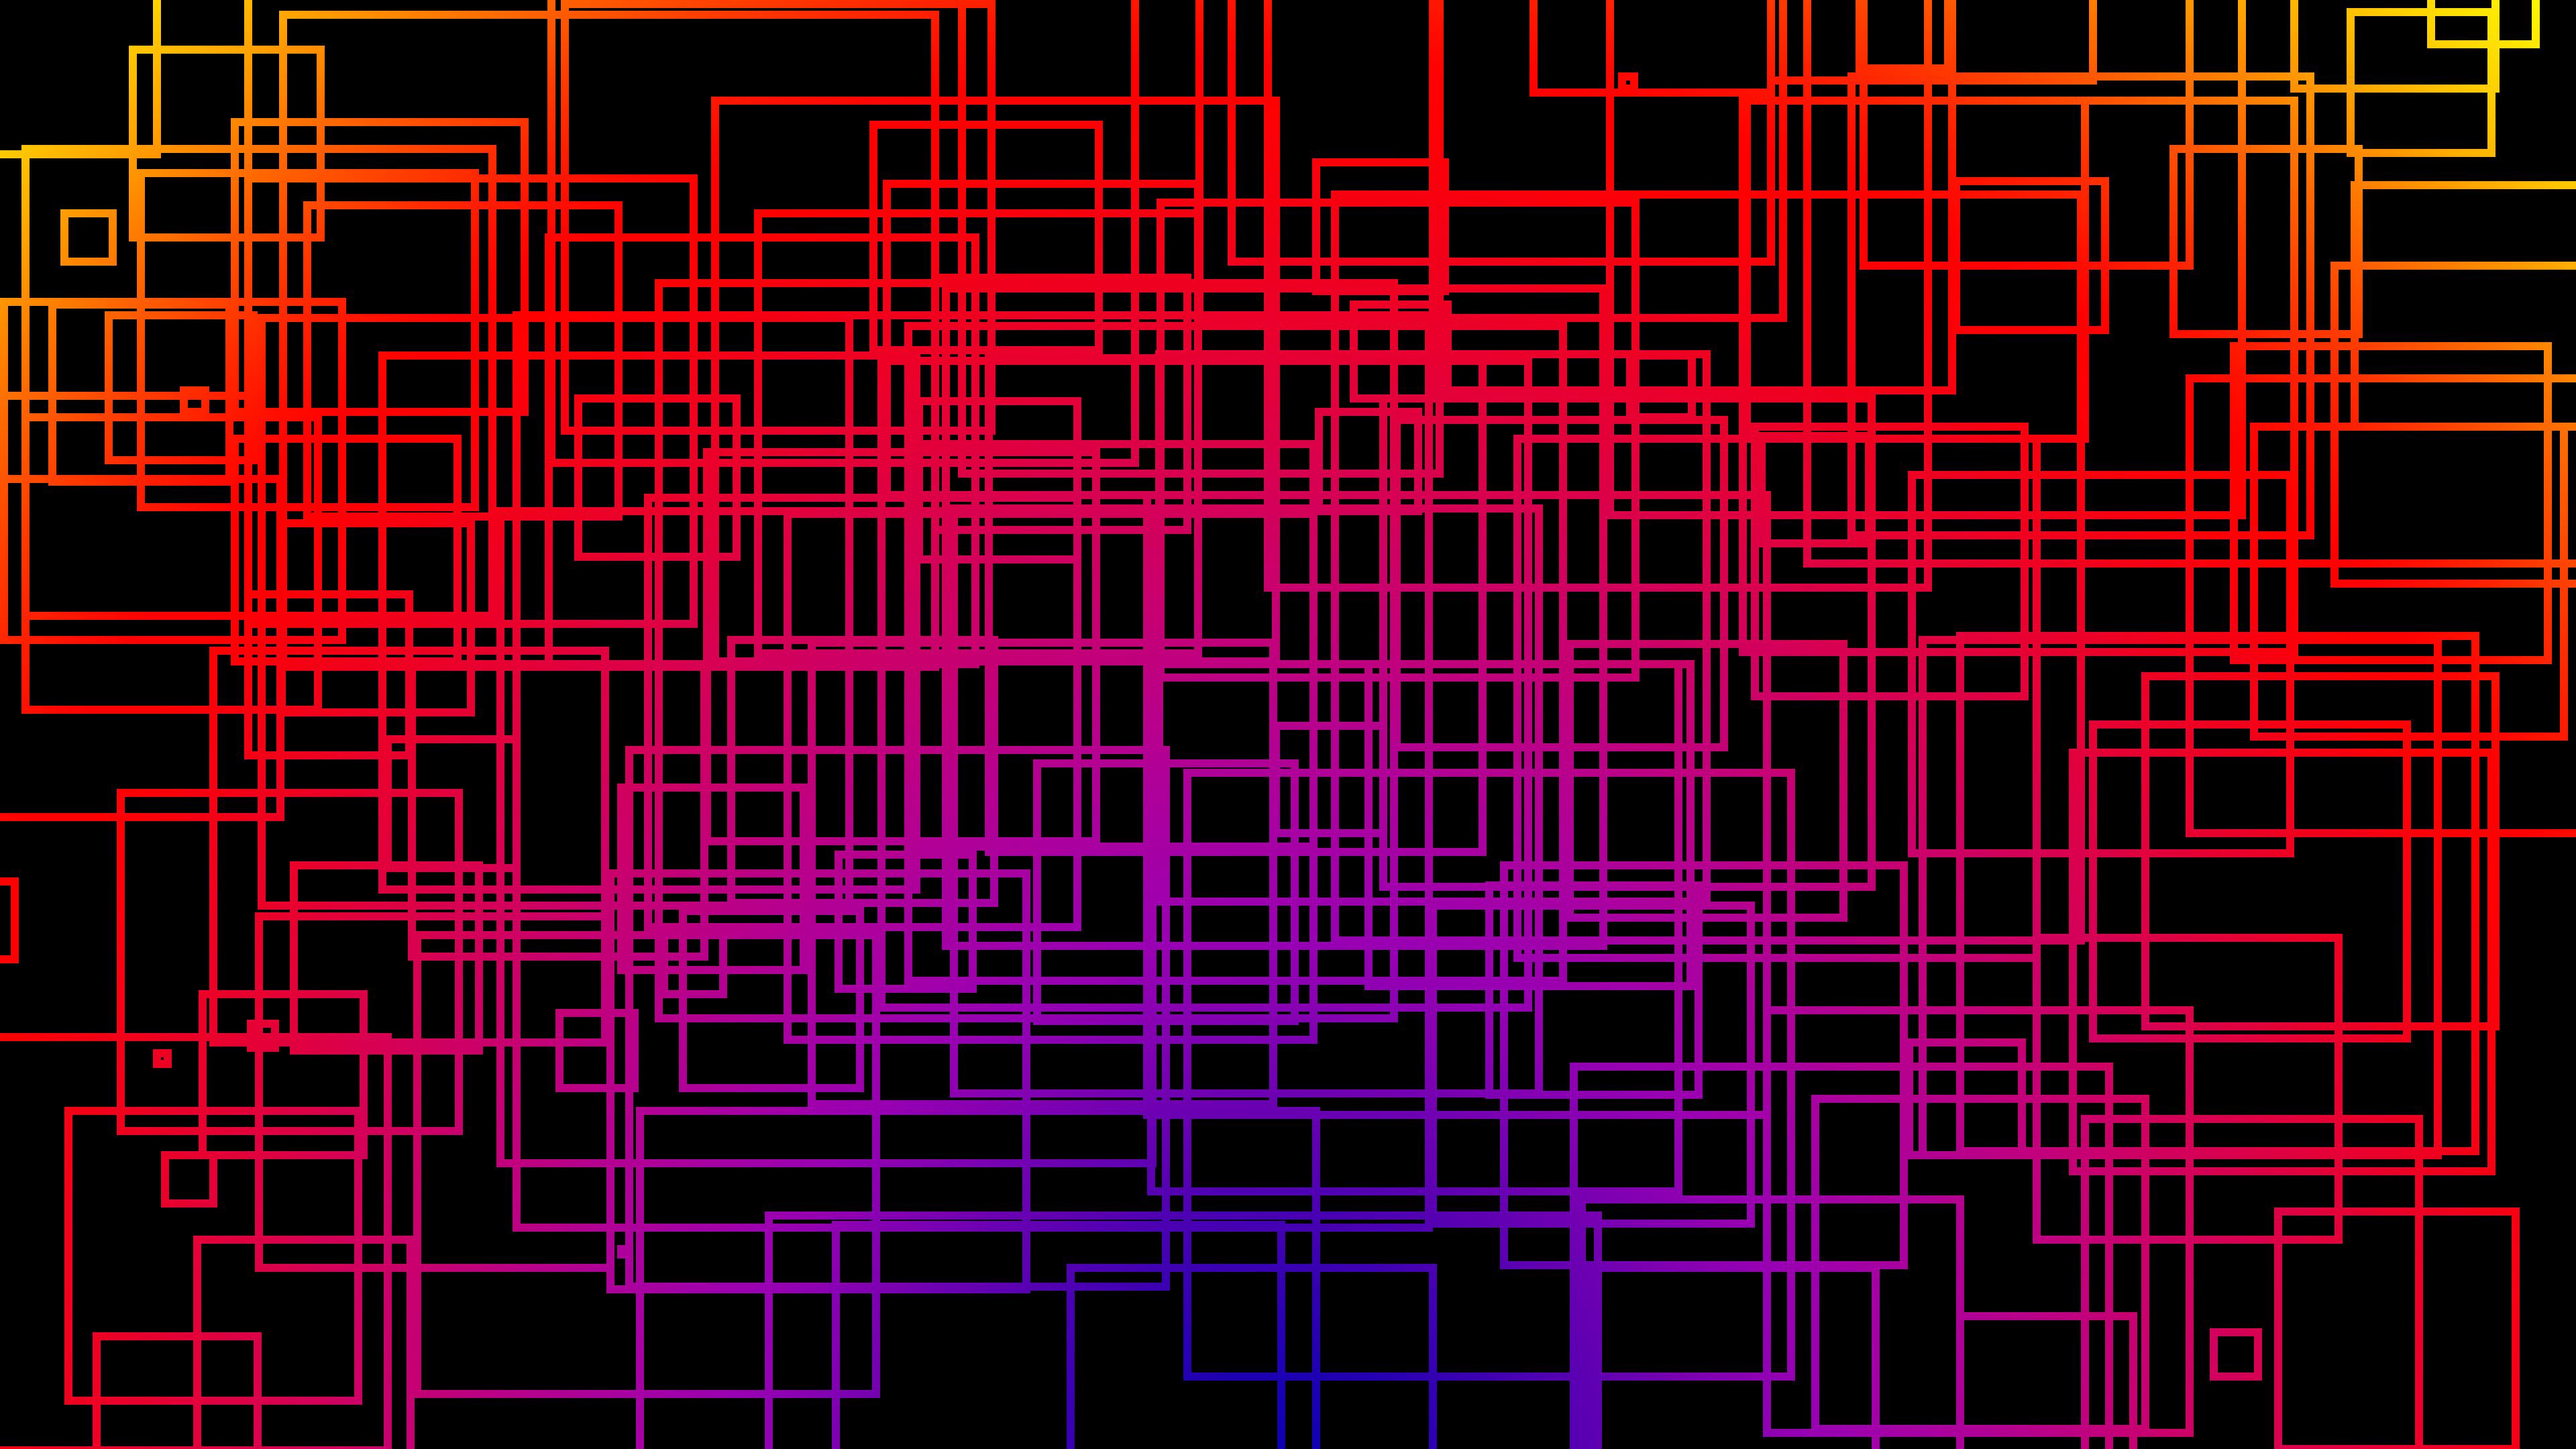 multicolored, abstract, motley, lines, gradient, crossing, weave, intersection High Definition image